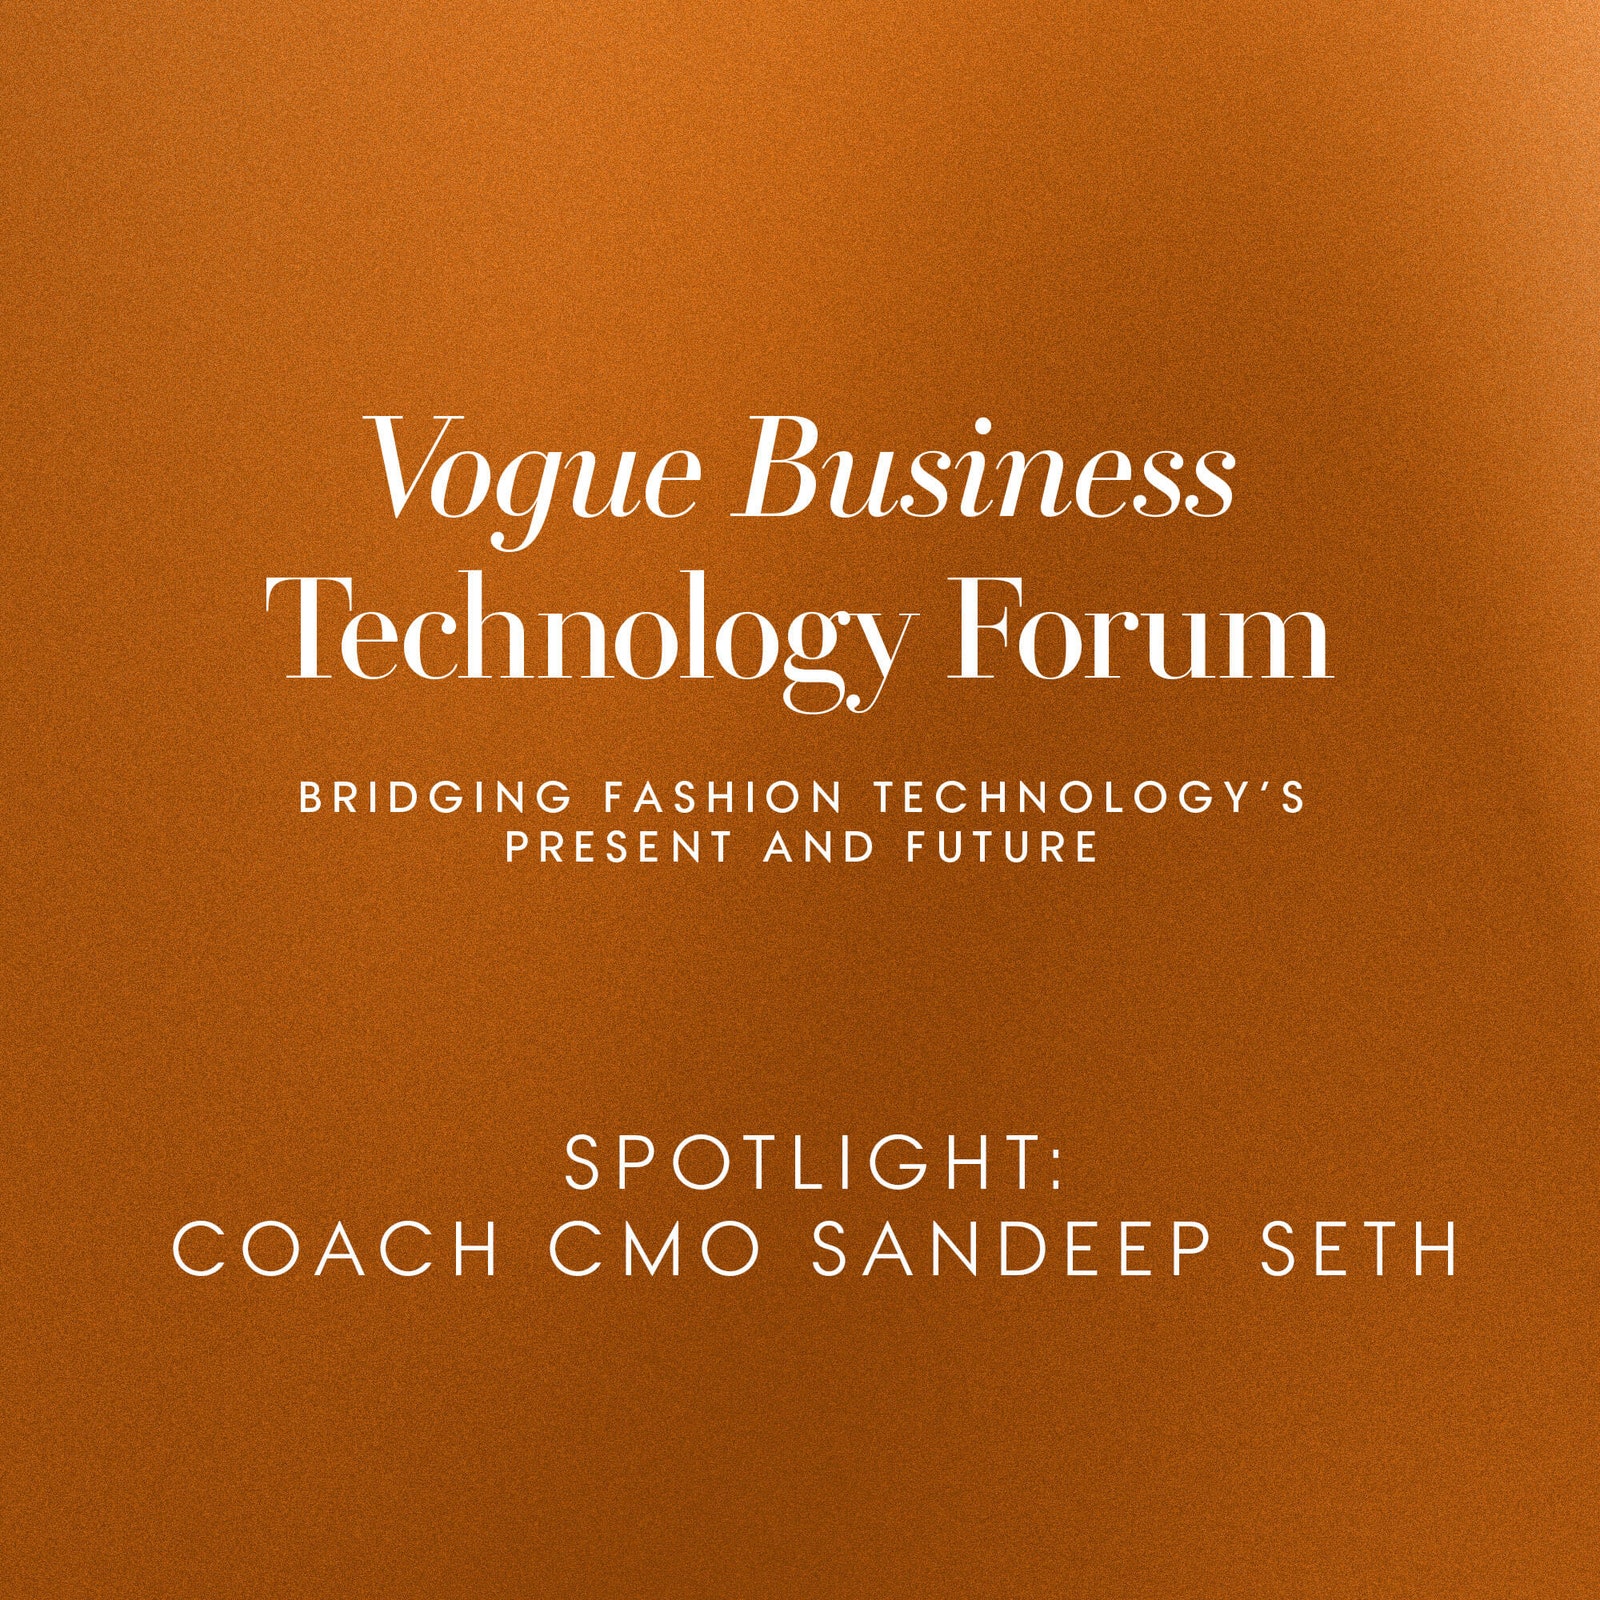 Coach CMO Sandeep Seth on why technology shouldn’t come first